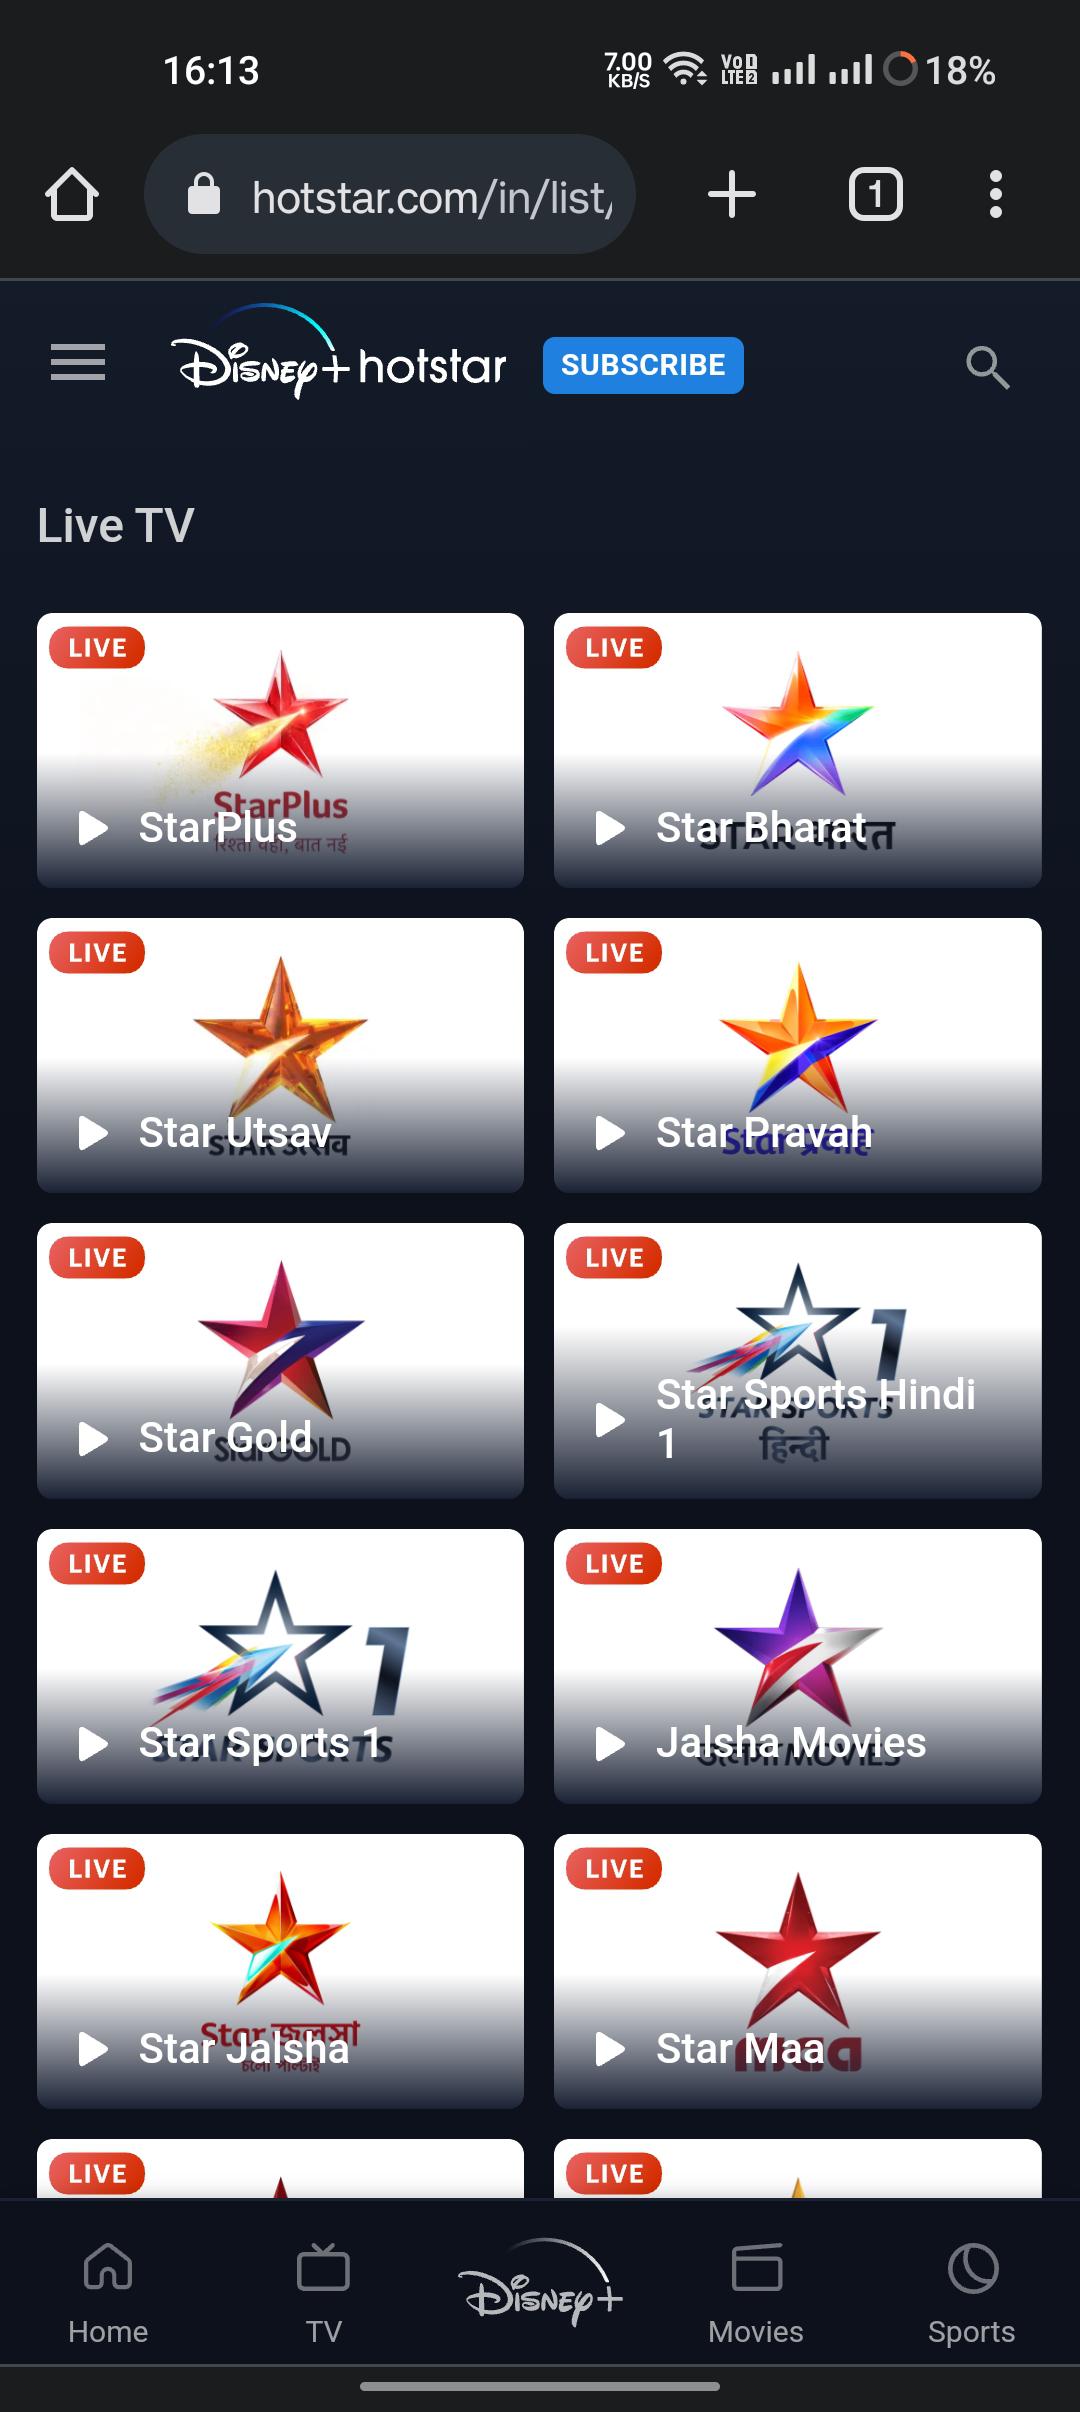 Disney+ Hotstar May Soon Launch Live TV Feature With Star Sports and Entertainment Channels